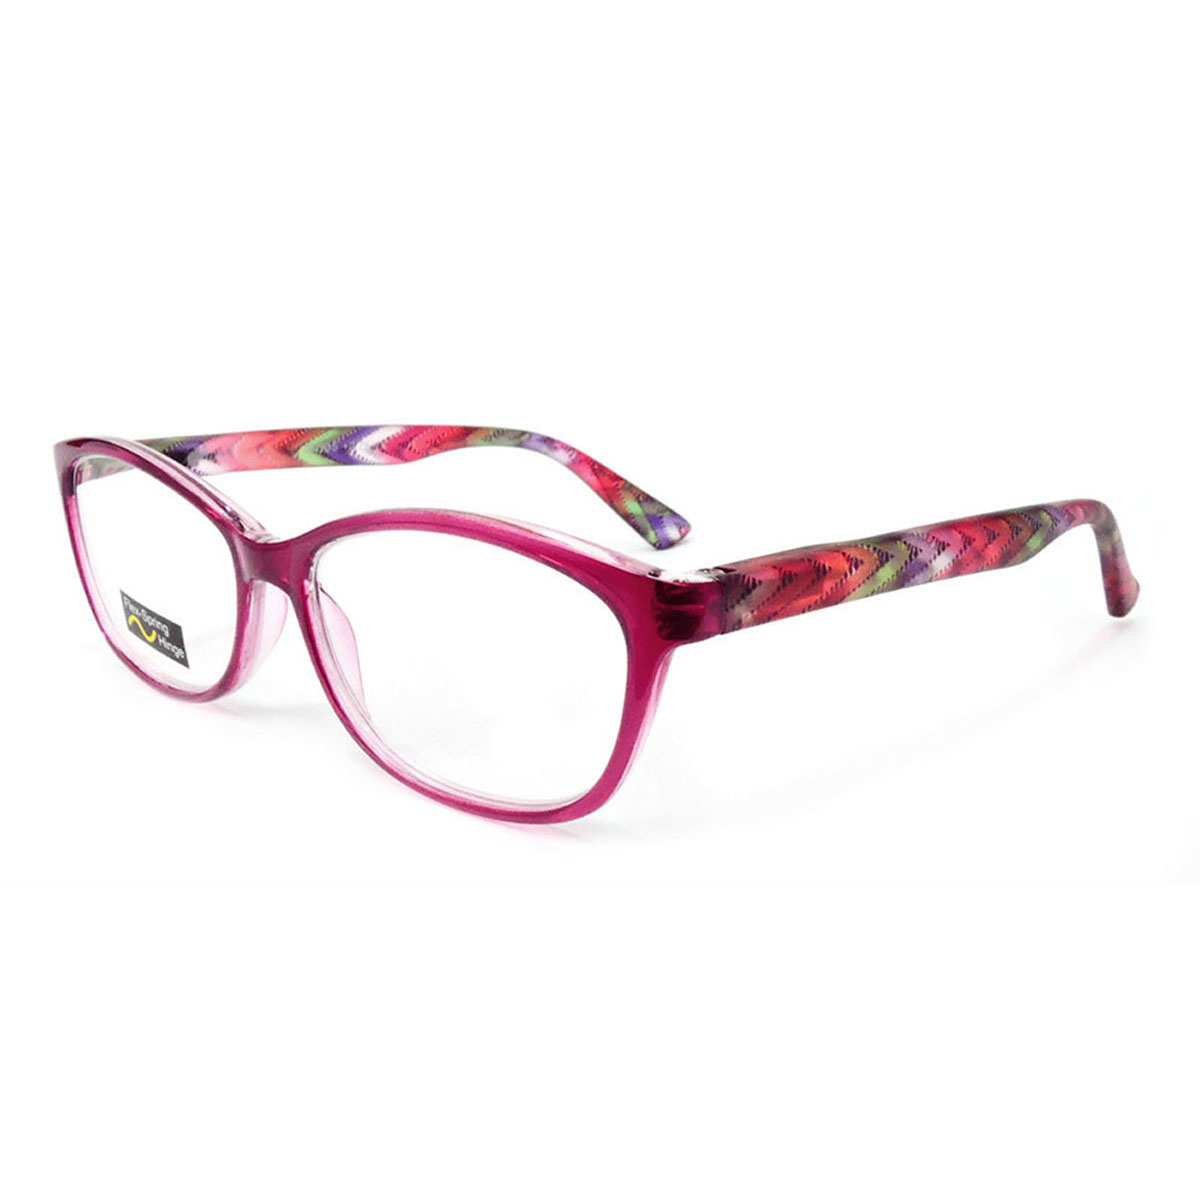 Classic Frame Reading Glasses Colorful Arms Retro Vintage Style - Red, +2.75